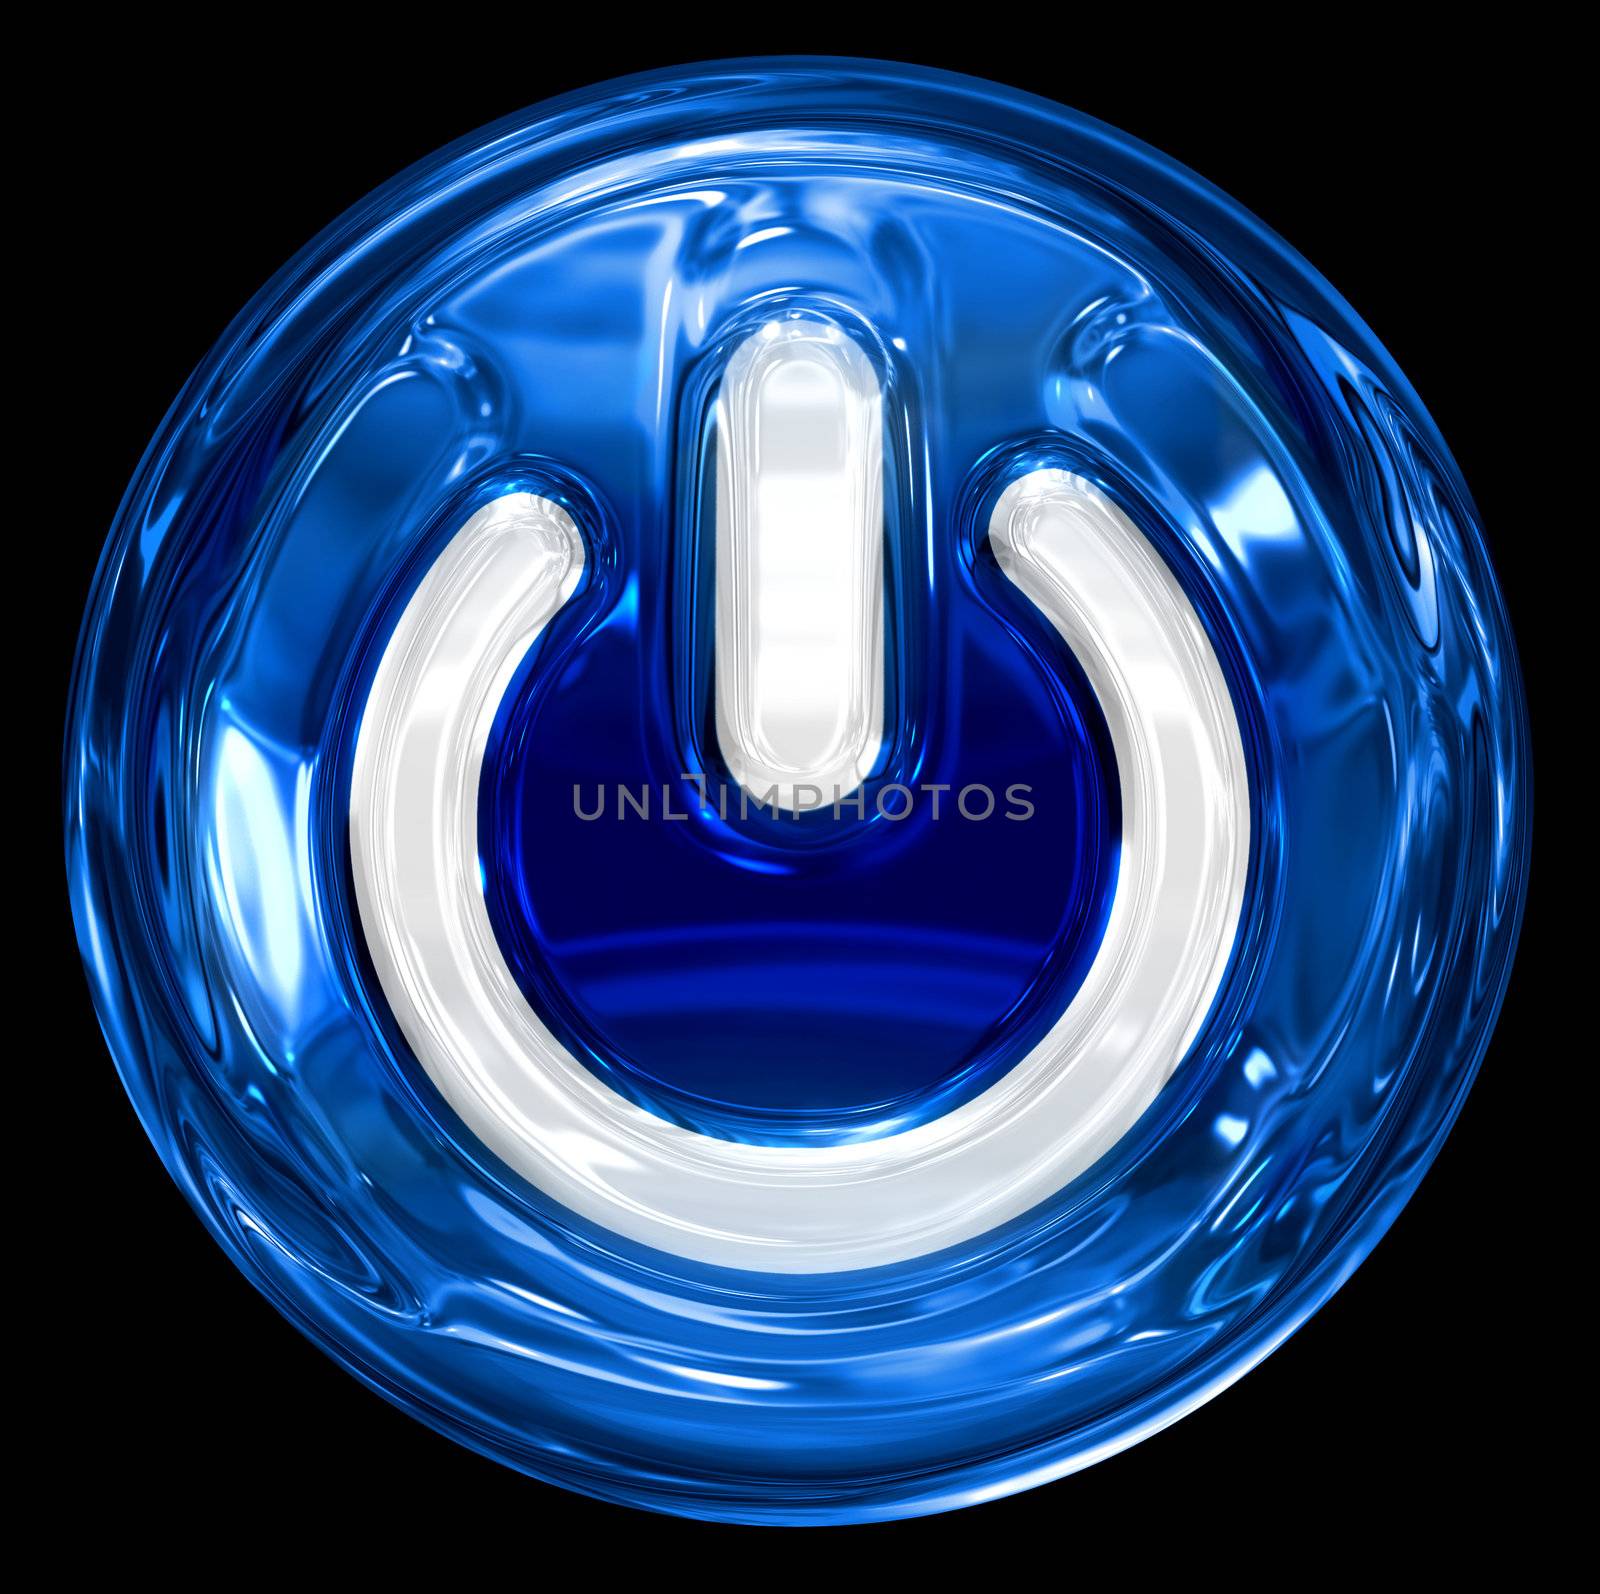 power button blue, isolated on black background. by zeffss